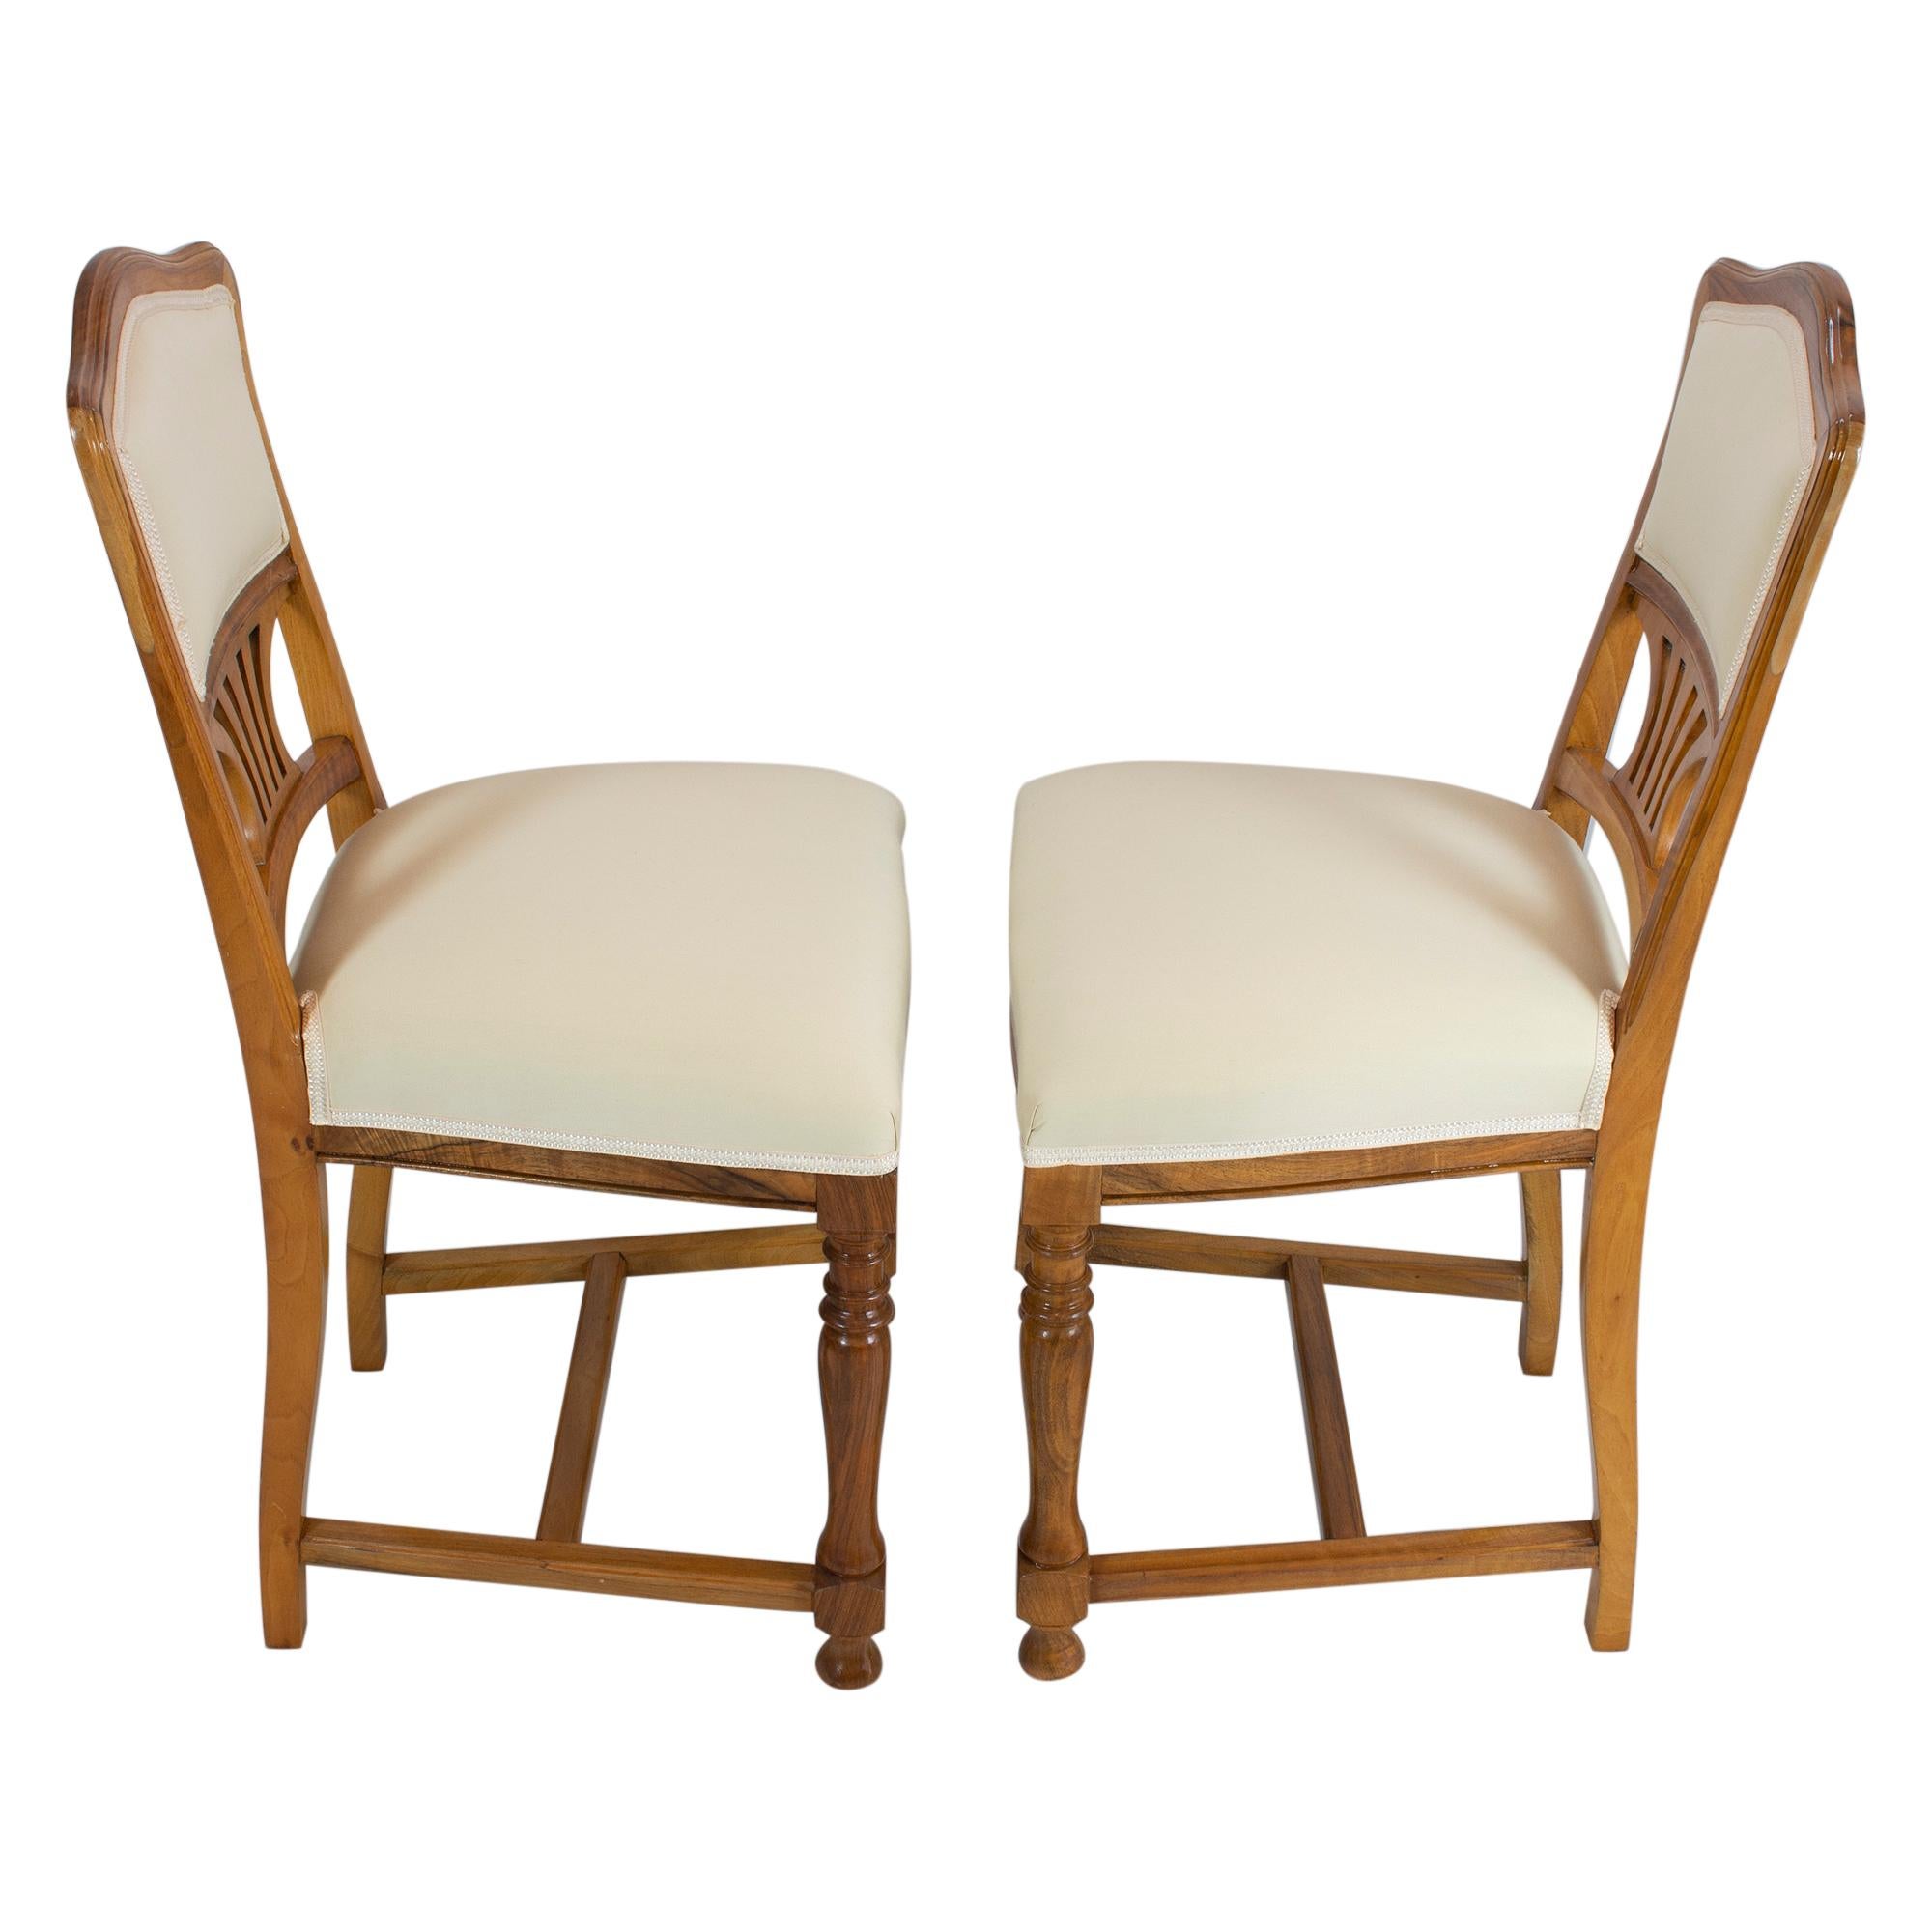 Polished Art Nouveau Walnut Pair of Chairs For Sale